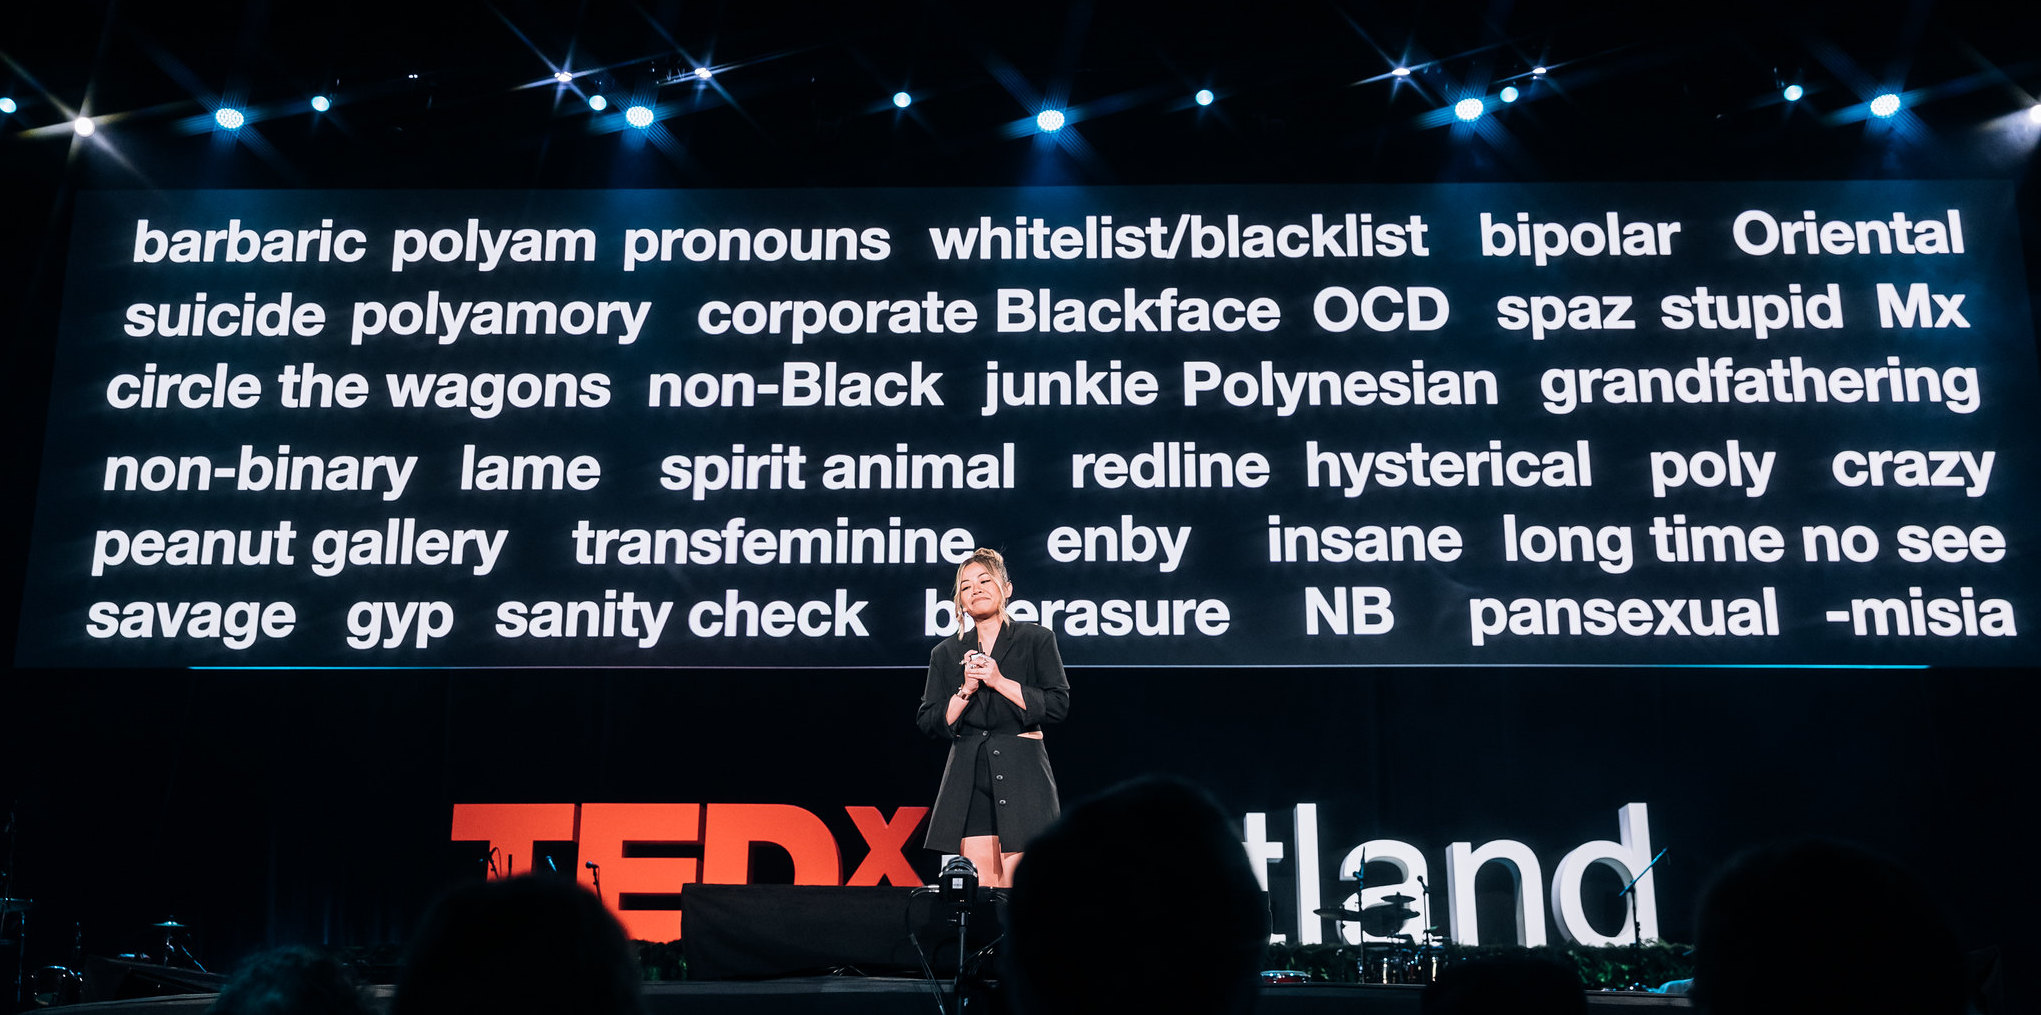 Tatiana Mac, smiling, cross-legged, standing in black suit on a TEDxPortland stage with giant words from Self-Defined app projected behind them